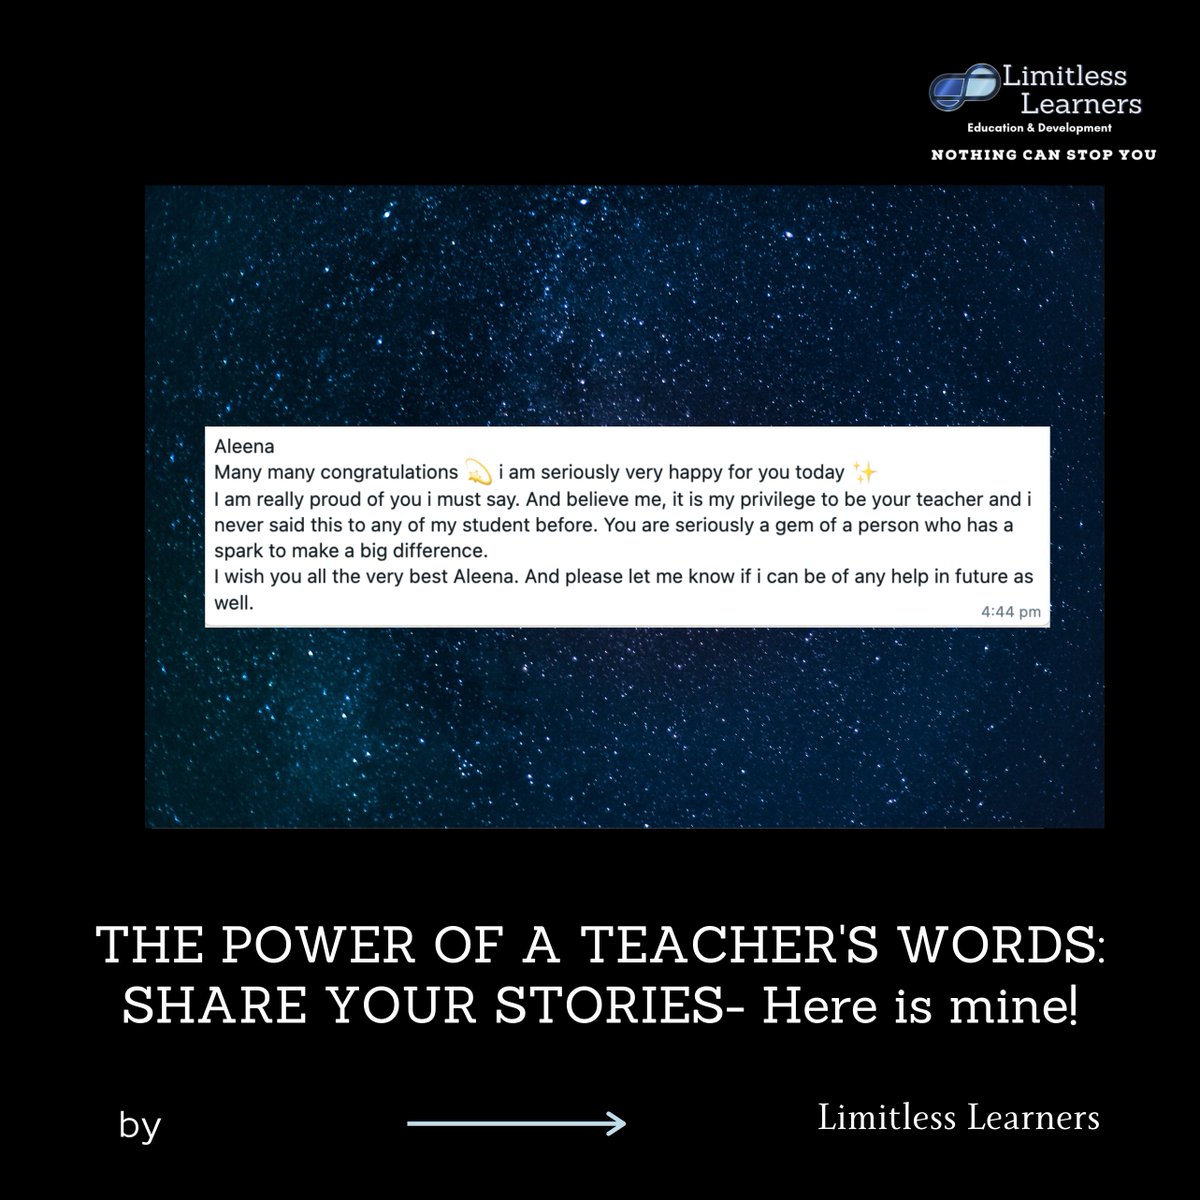 🌟 Share the moments when a teacher's words touched your heart and transformed your life. Let's celebrate the incredible impact educators have on shaping our journeys. ✨📚💙 

#TeachersTouchHearts #TransformativeWords #InspiringEducators #LimitlessLearners